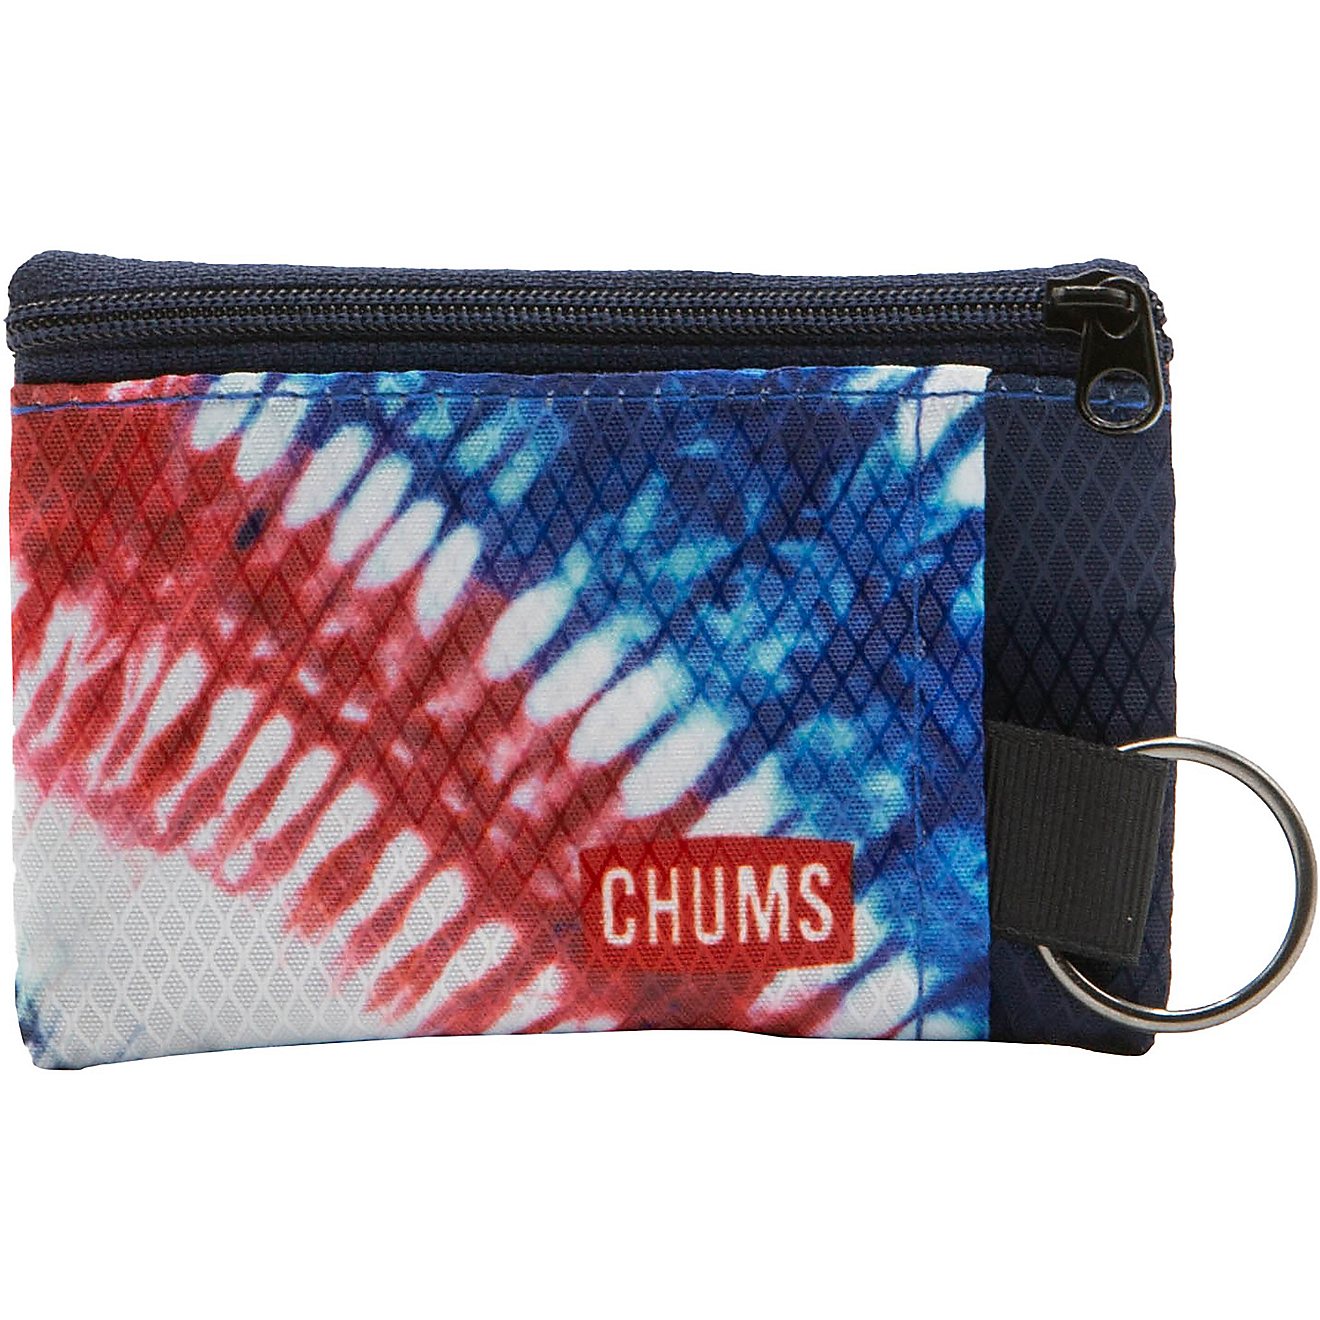 Chums Surfshort Wallet                                                                                                           - view number 1